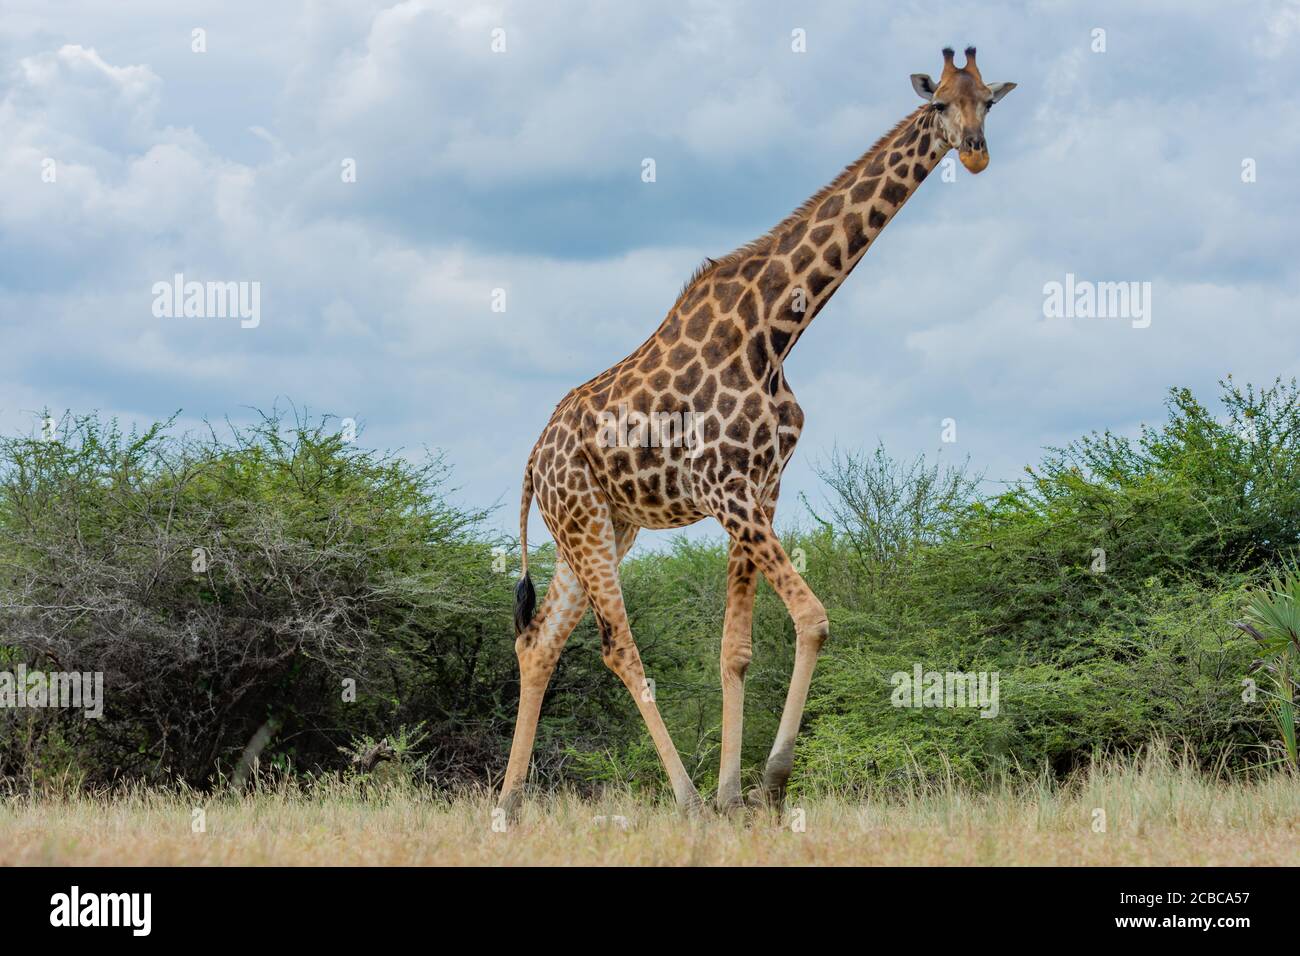 Une girafe africaine solo Banque D'Images